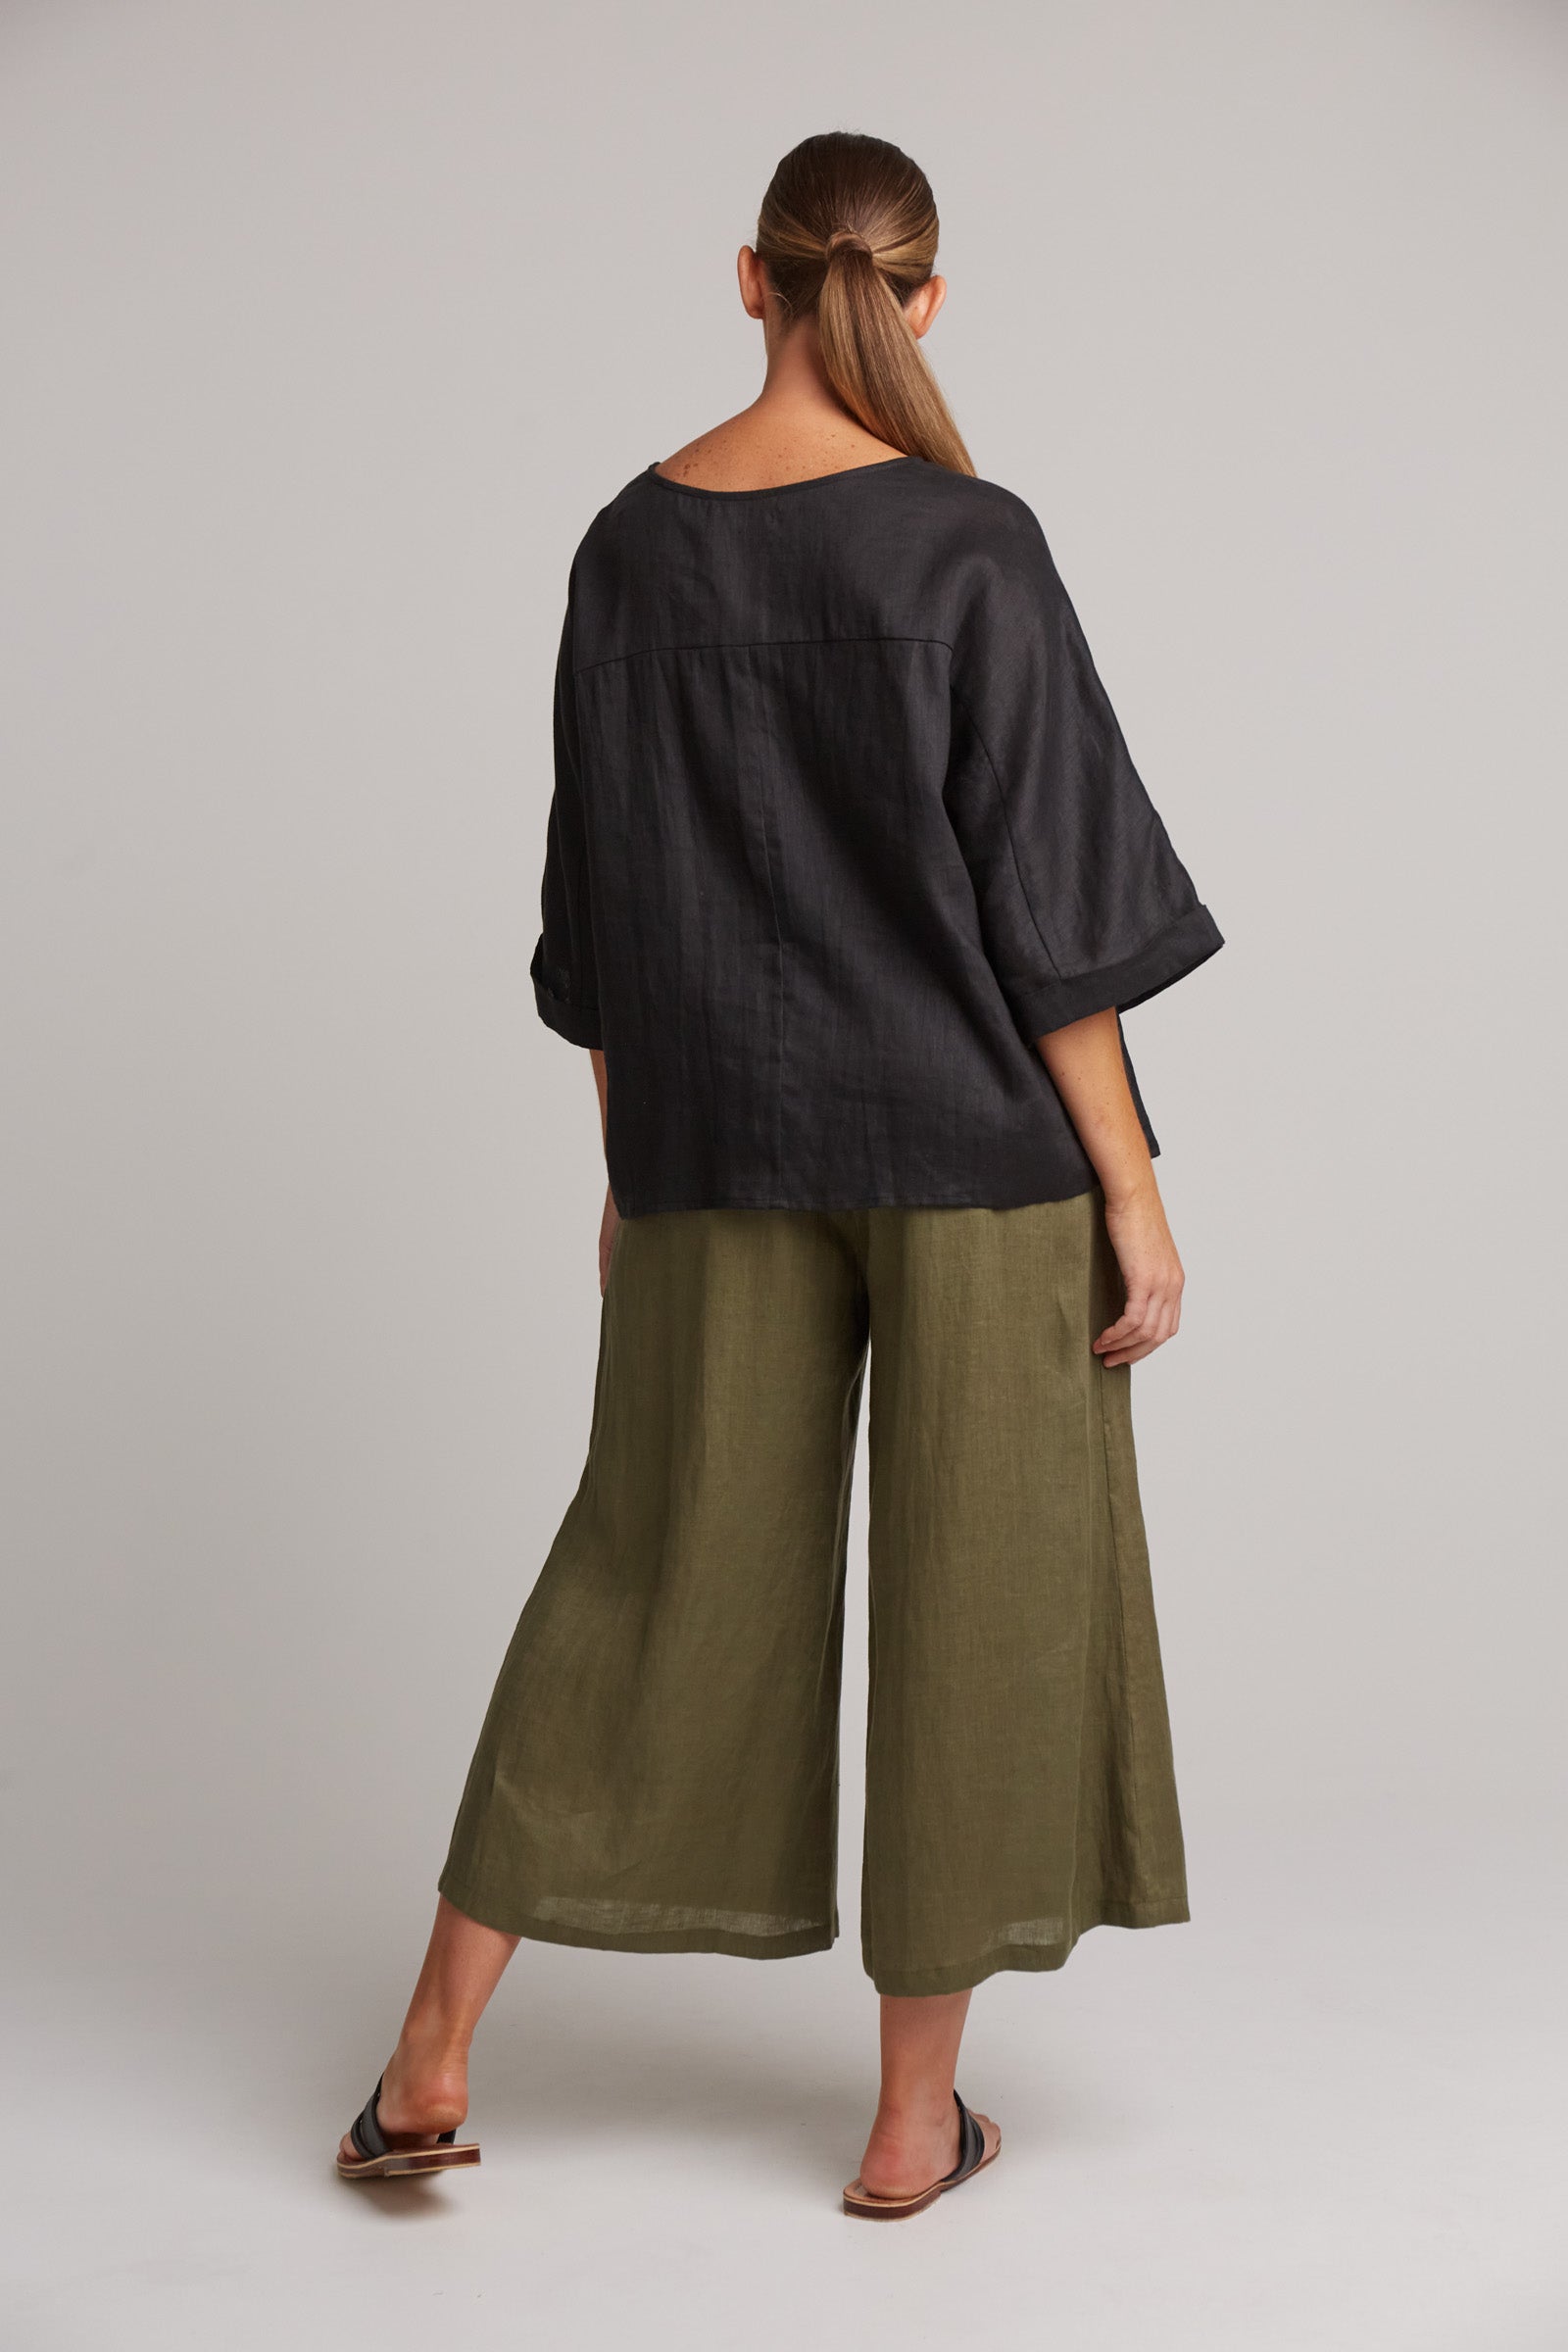 Studio Relaxed Top - Ebony - eb&ive Clothing - Top 3/4 Sleeve Linen